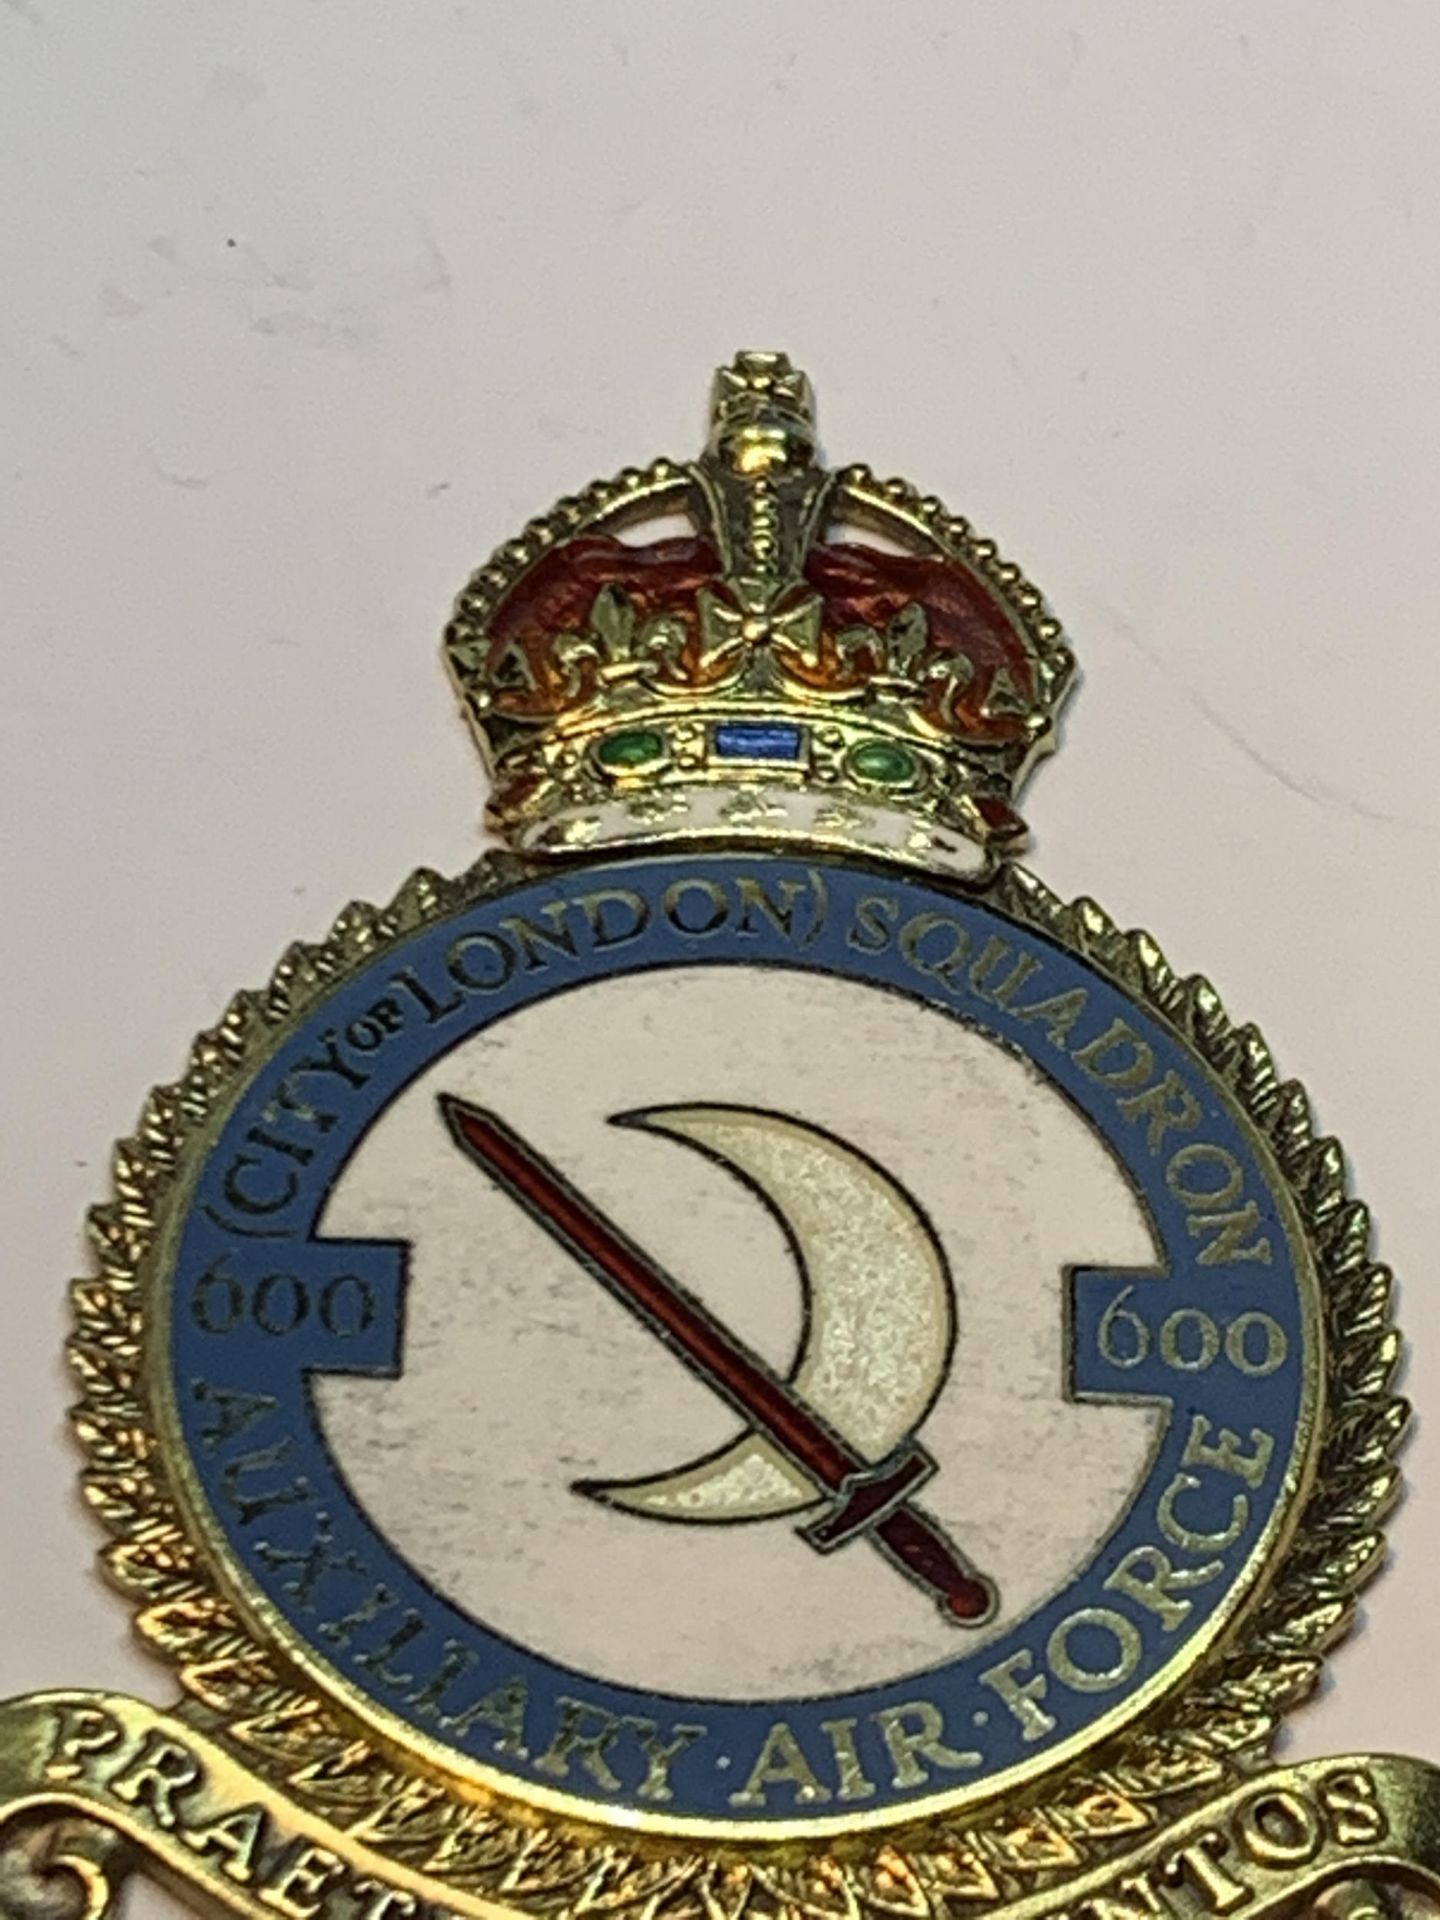 A HALLMARKED BIRMINGHAM SILVER AUXILLARY AIR FORCE CITY OF LONDON SQUADRON 600 PRAETER SESCENTOS - Image 2 of 4